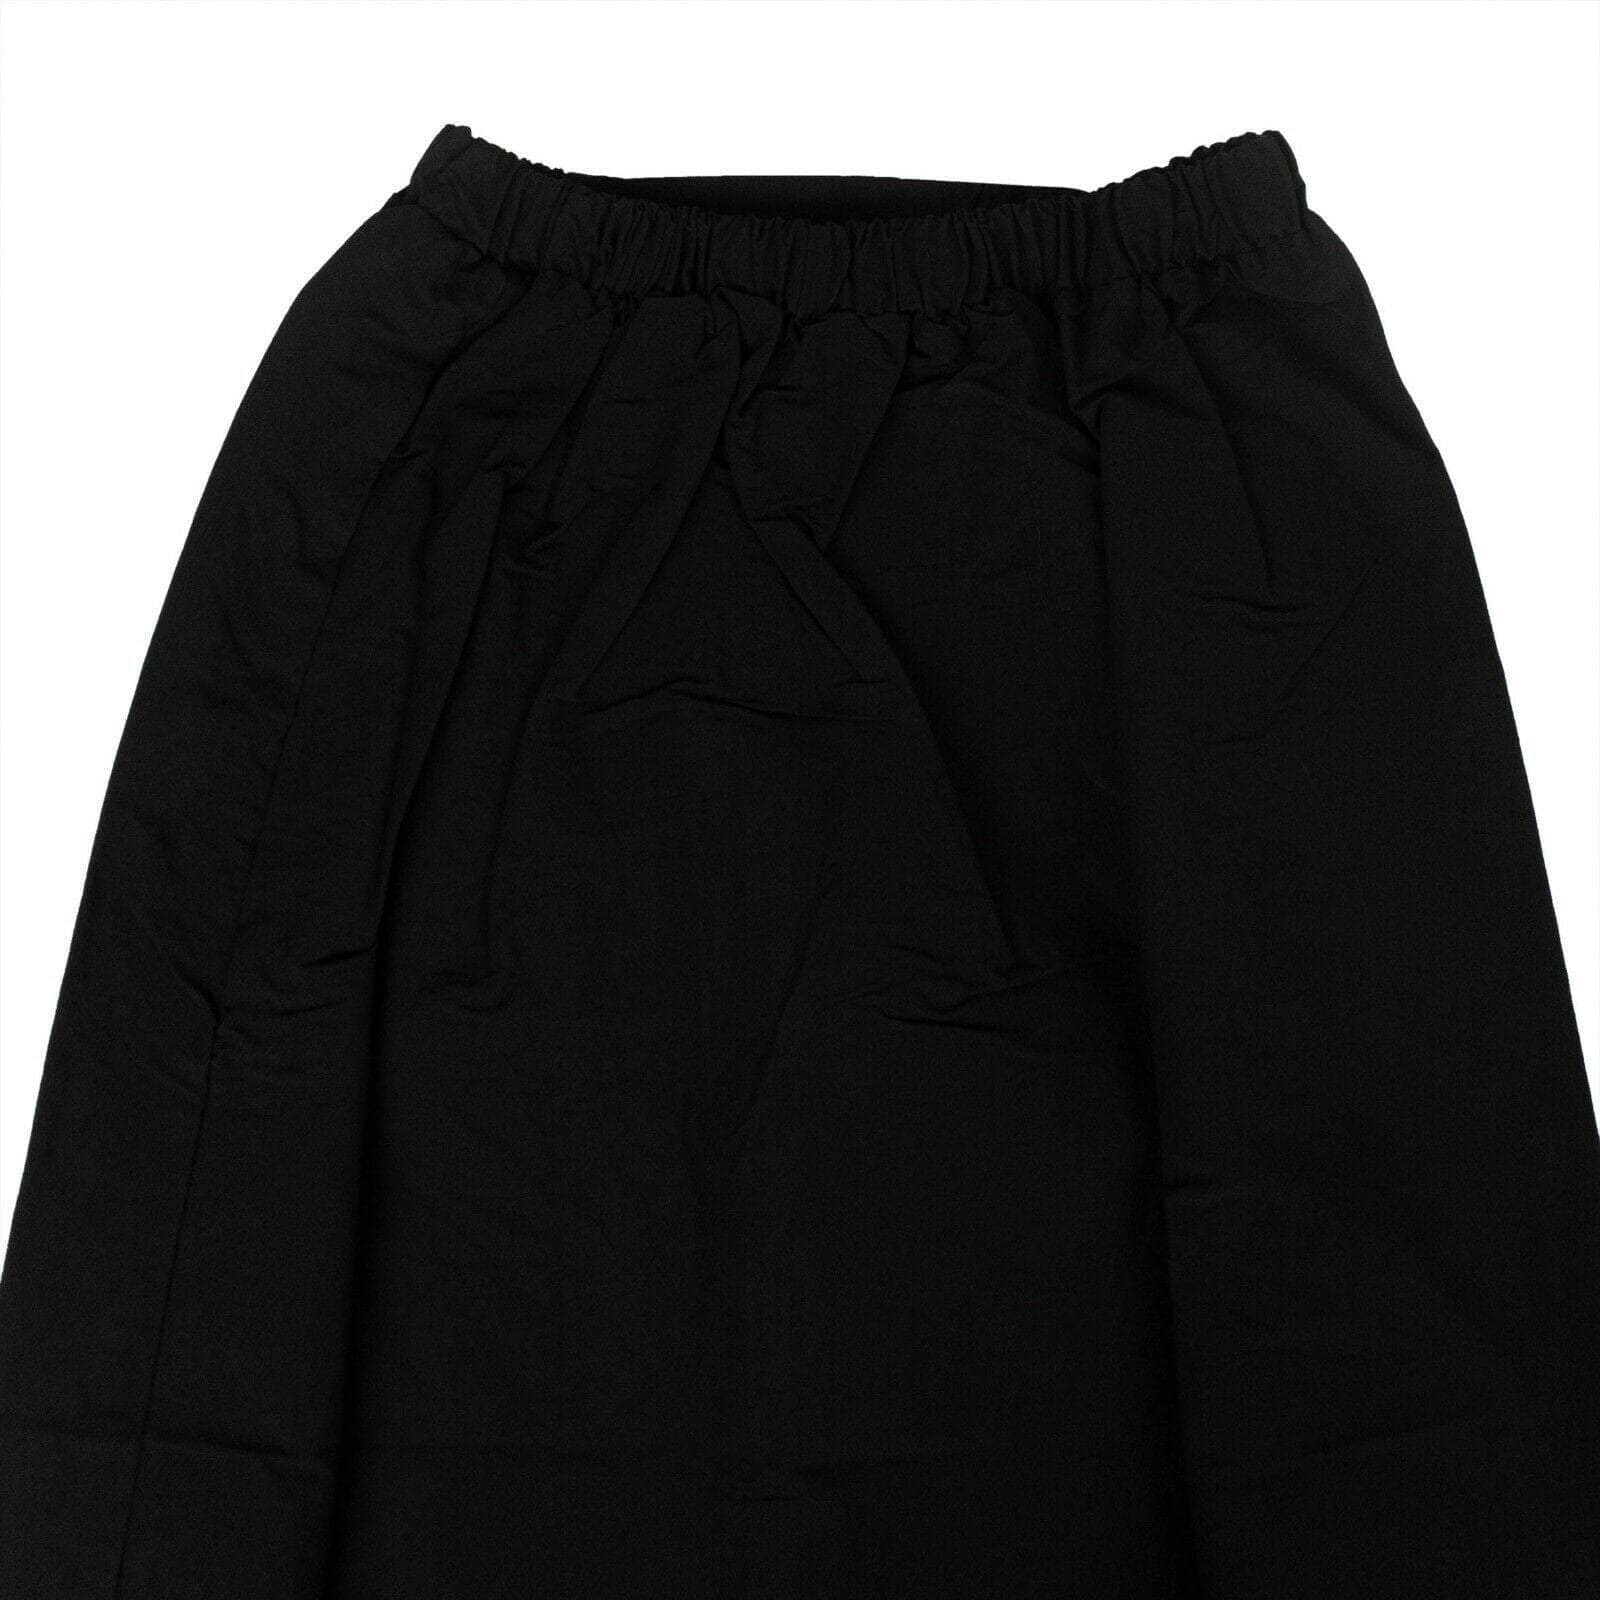 A-COLD-WALL* 250-500, a-cold-wall, couponcollection, gender-womens, main-clothing, size-l, size-m, size-s, size-xs, womens-skirts Cotton Snap Midi Skirt - Black